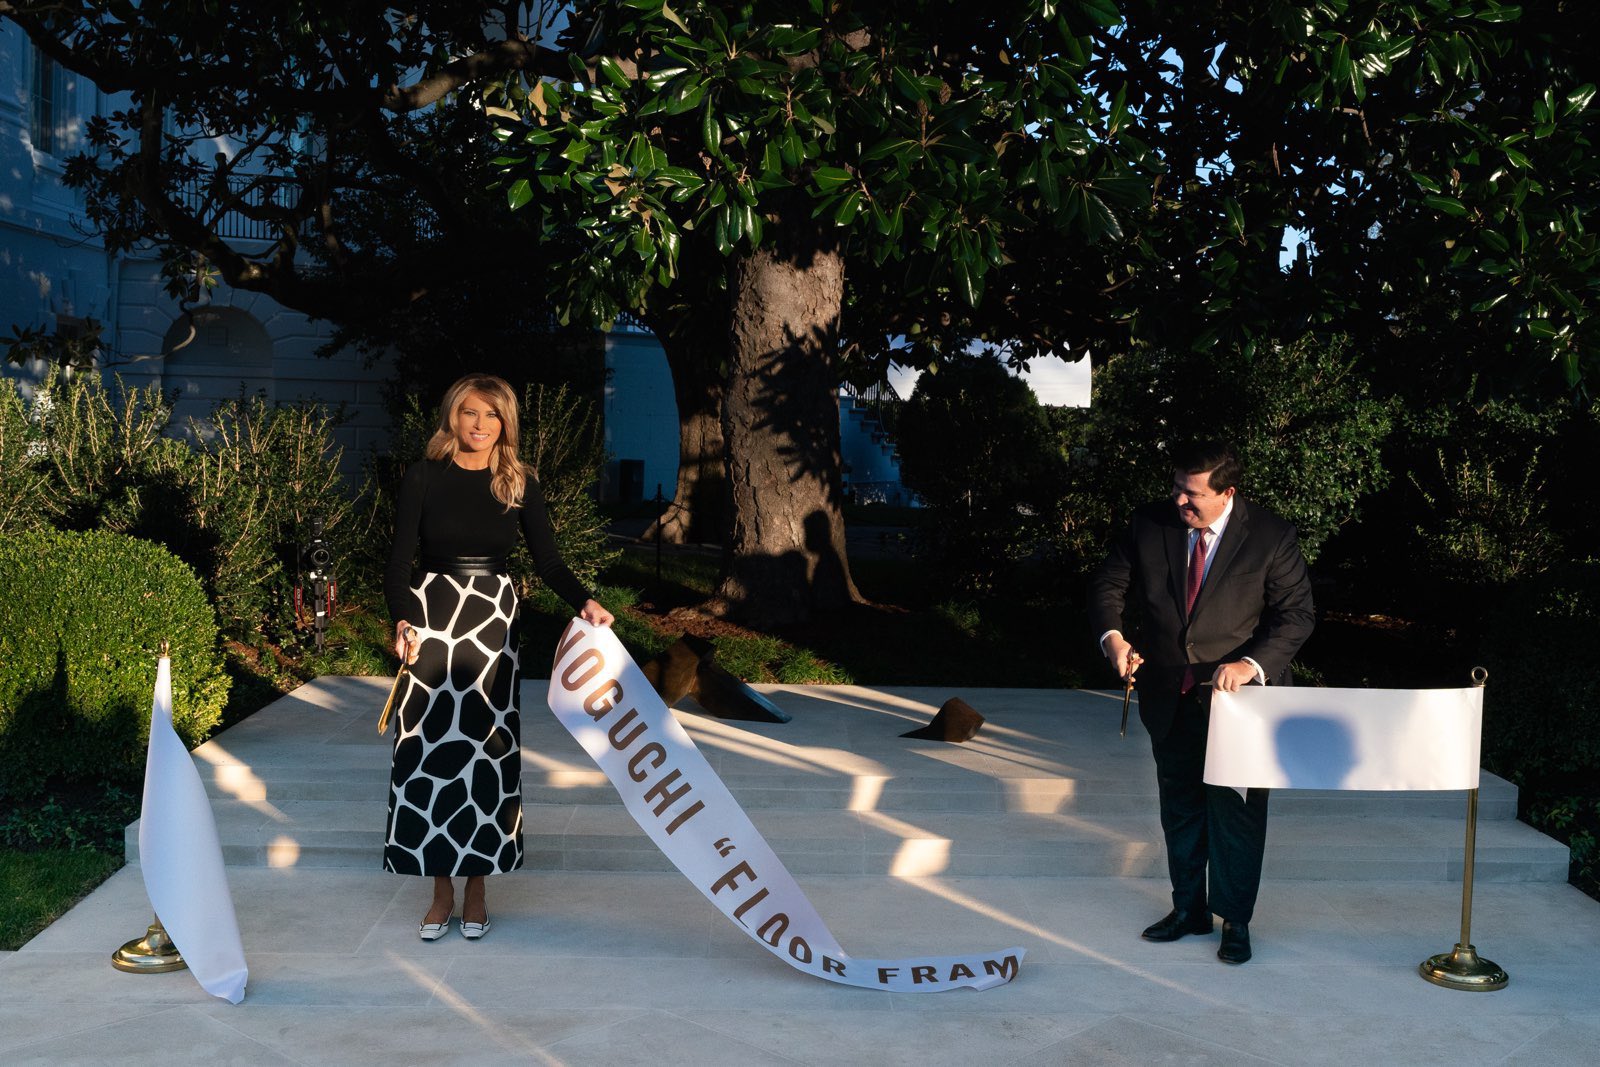 Melania Trump 45 Archived On Twitter We Unveiled Isamu Noguchi S Floor Frame Sculpture In The Rose Garden Whitehouse Yesterday The Art Piece Is Humble In Scale Complements The Authority Of The Oval